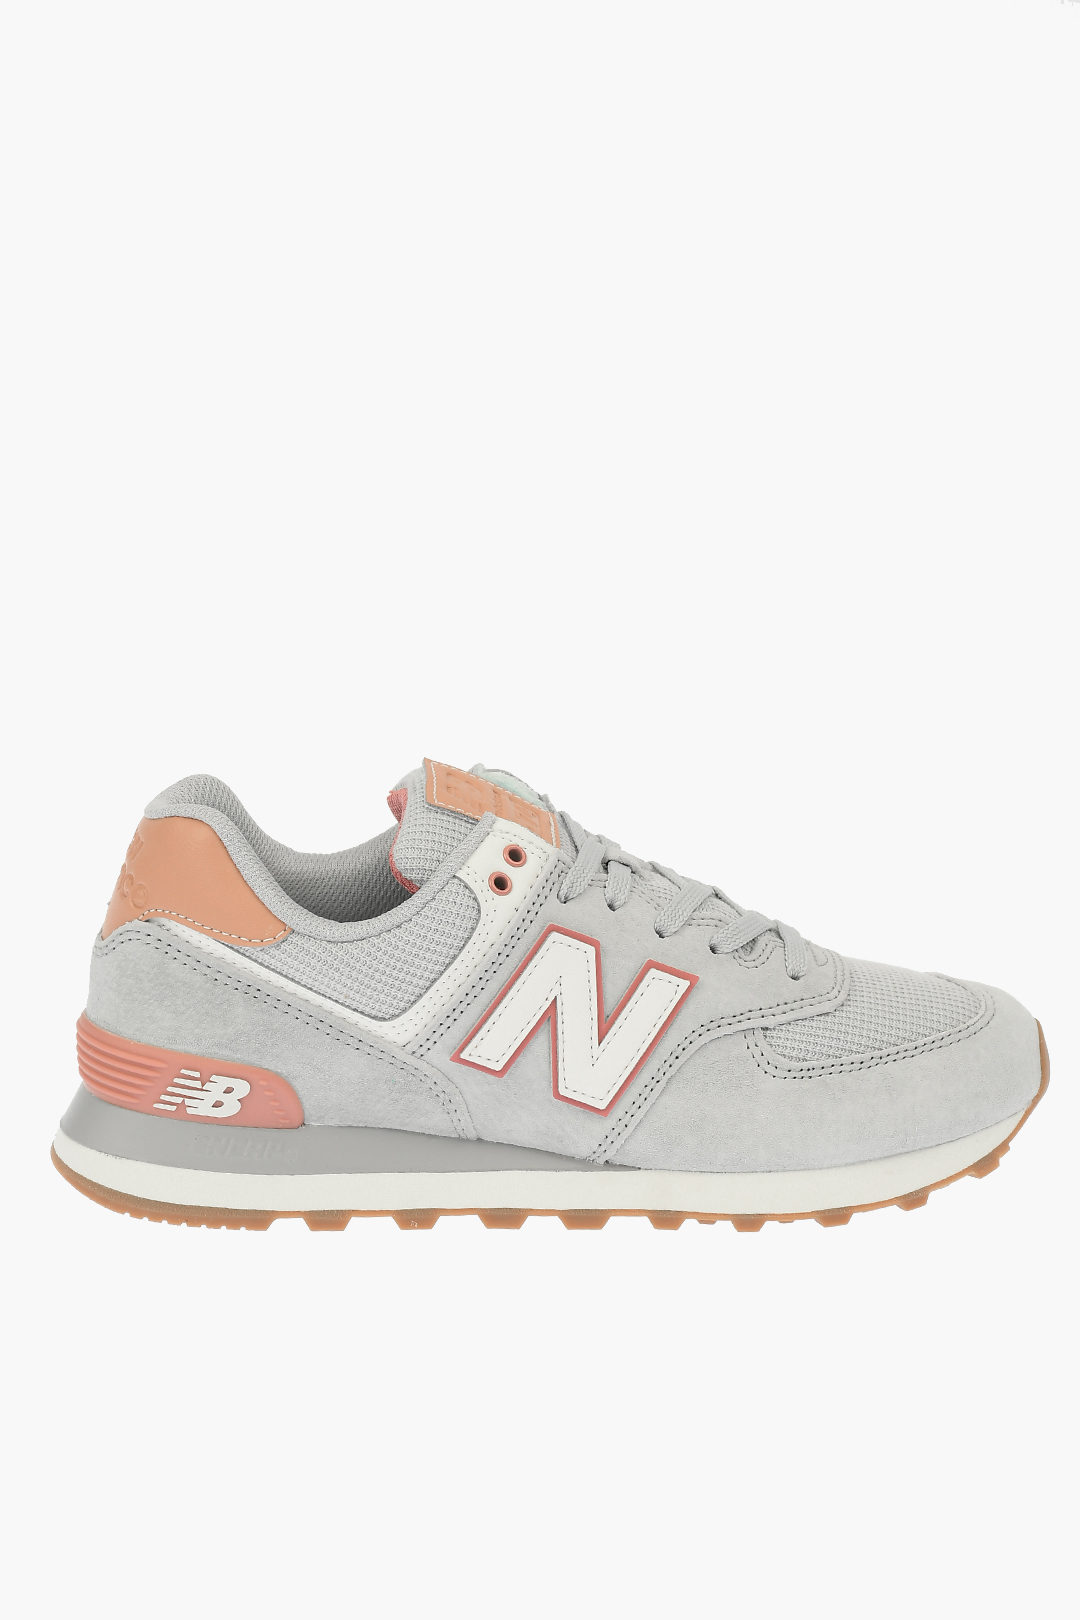 Amerika tetraëder Promoten New Balance leather and Fabric 574 Sneakers women - Glamood Outlet